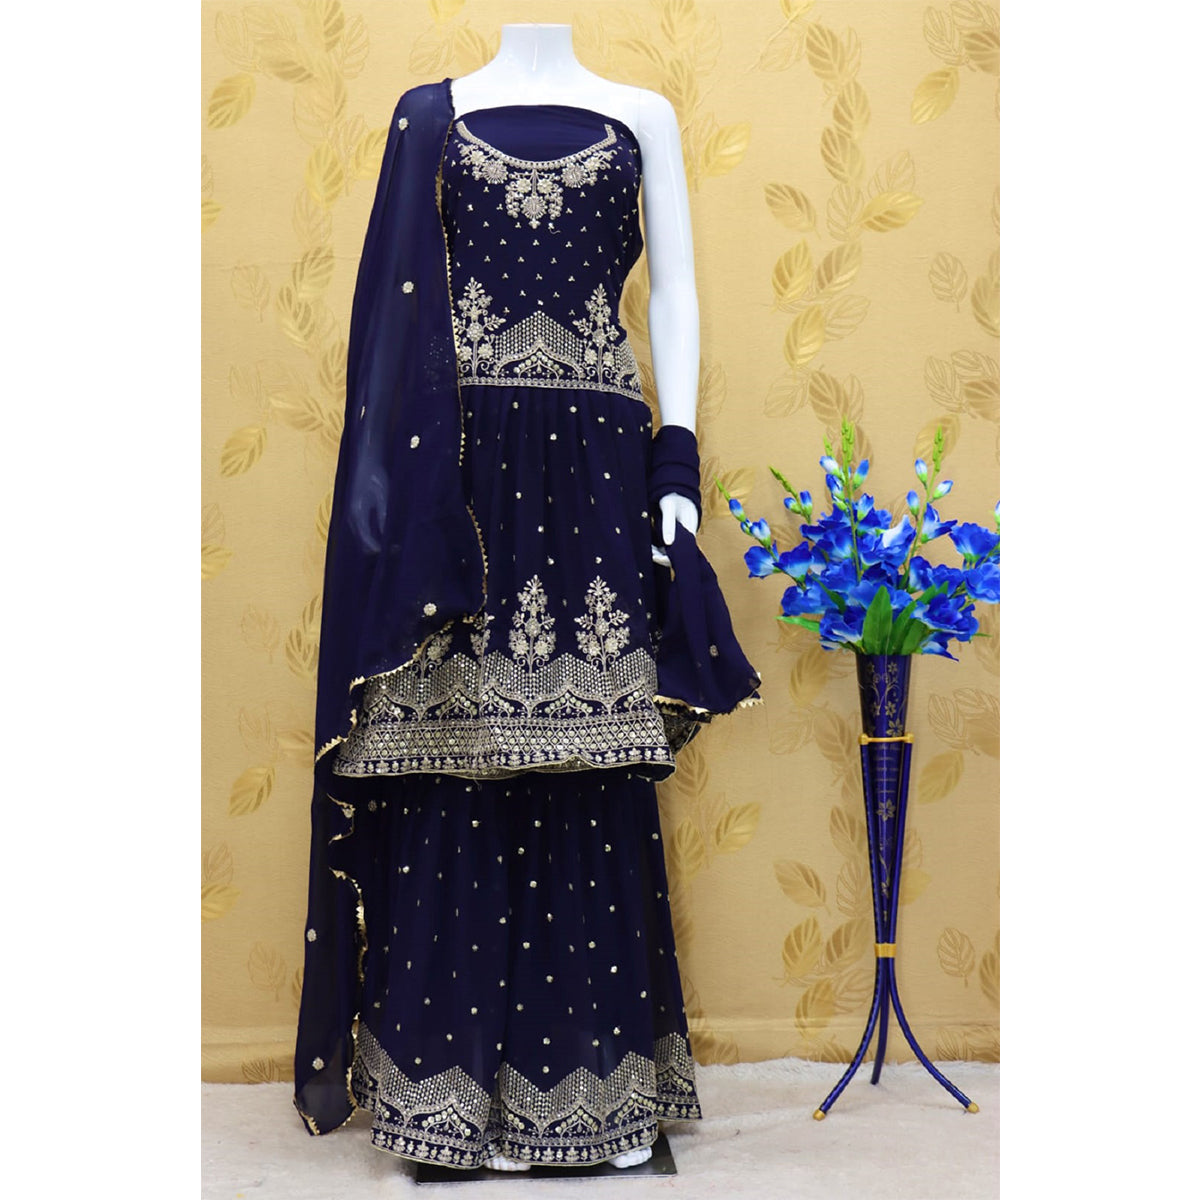 Shafnufab Heavy Faux Georgette Semi Stitched Plazzo Suit In BLUE COLOR